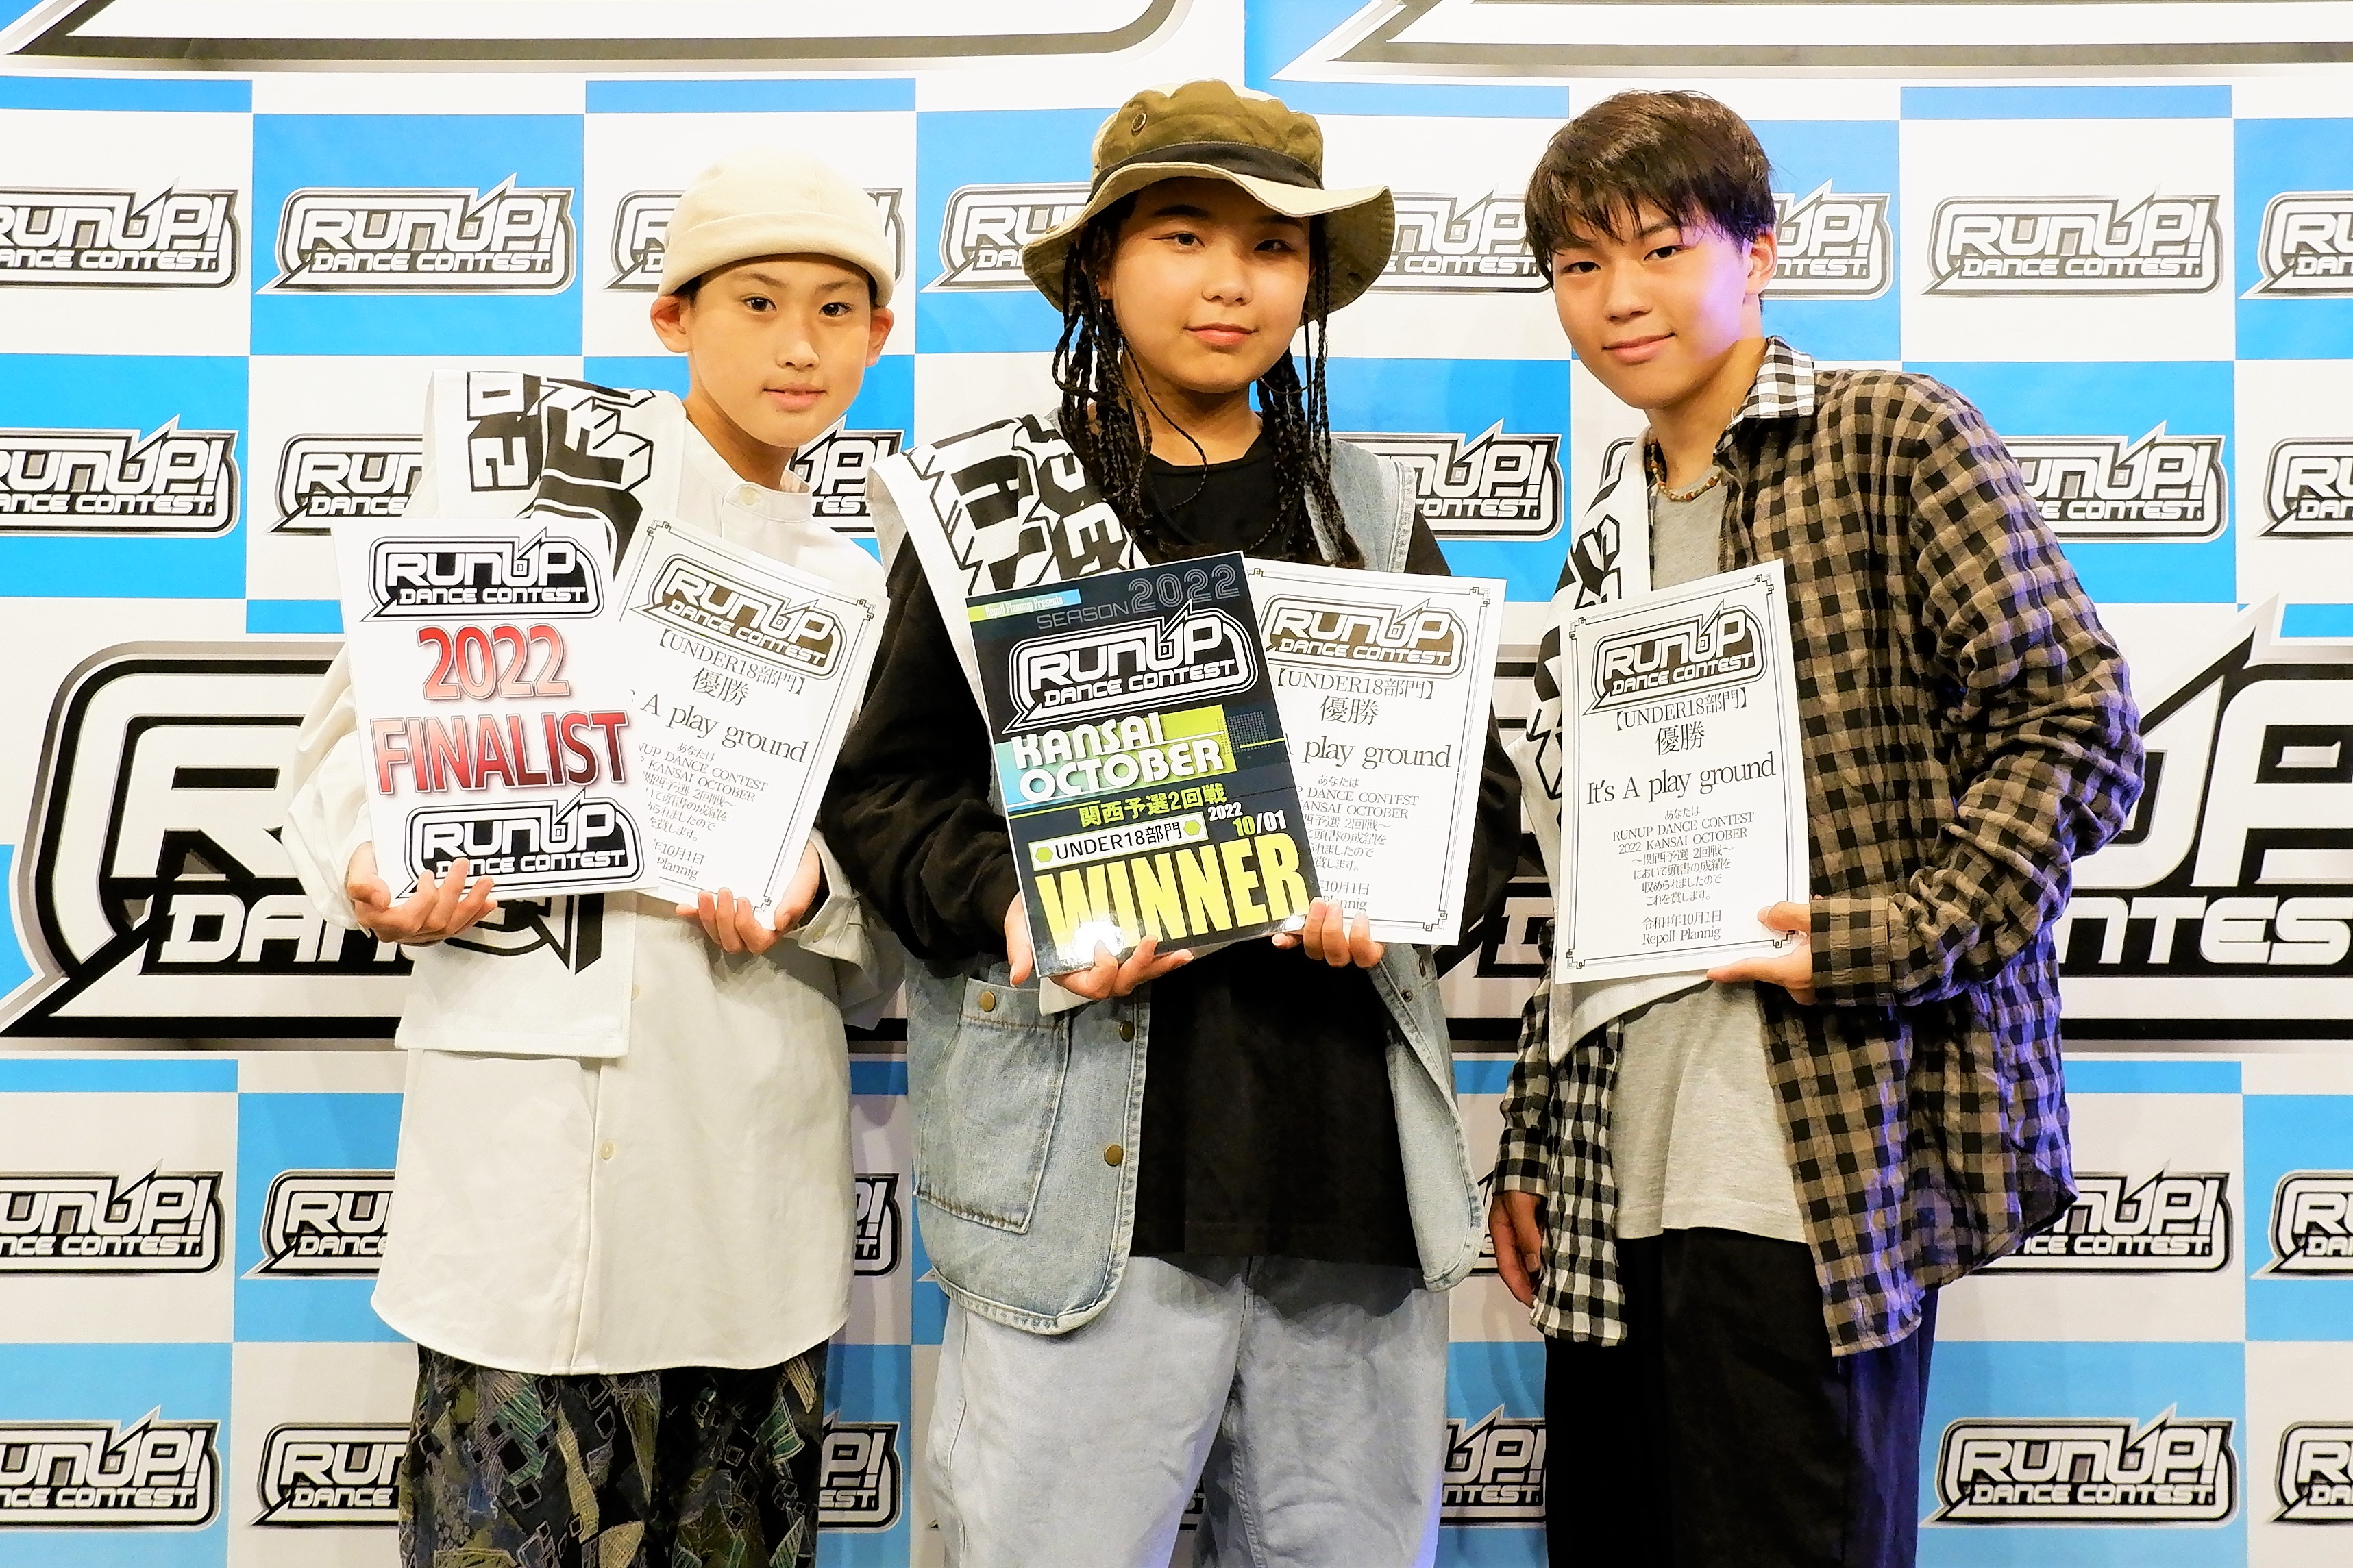 RUNUP 2022 KANSAI OCTOBER UNDER18 優勝 It’s A play ground